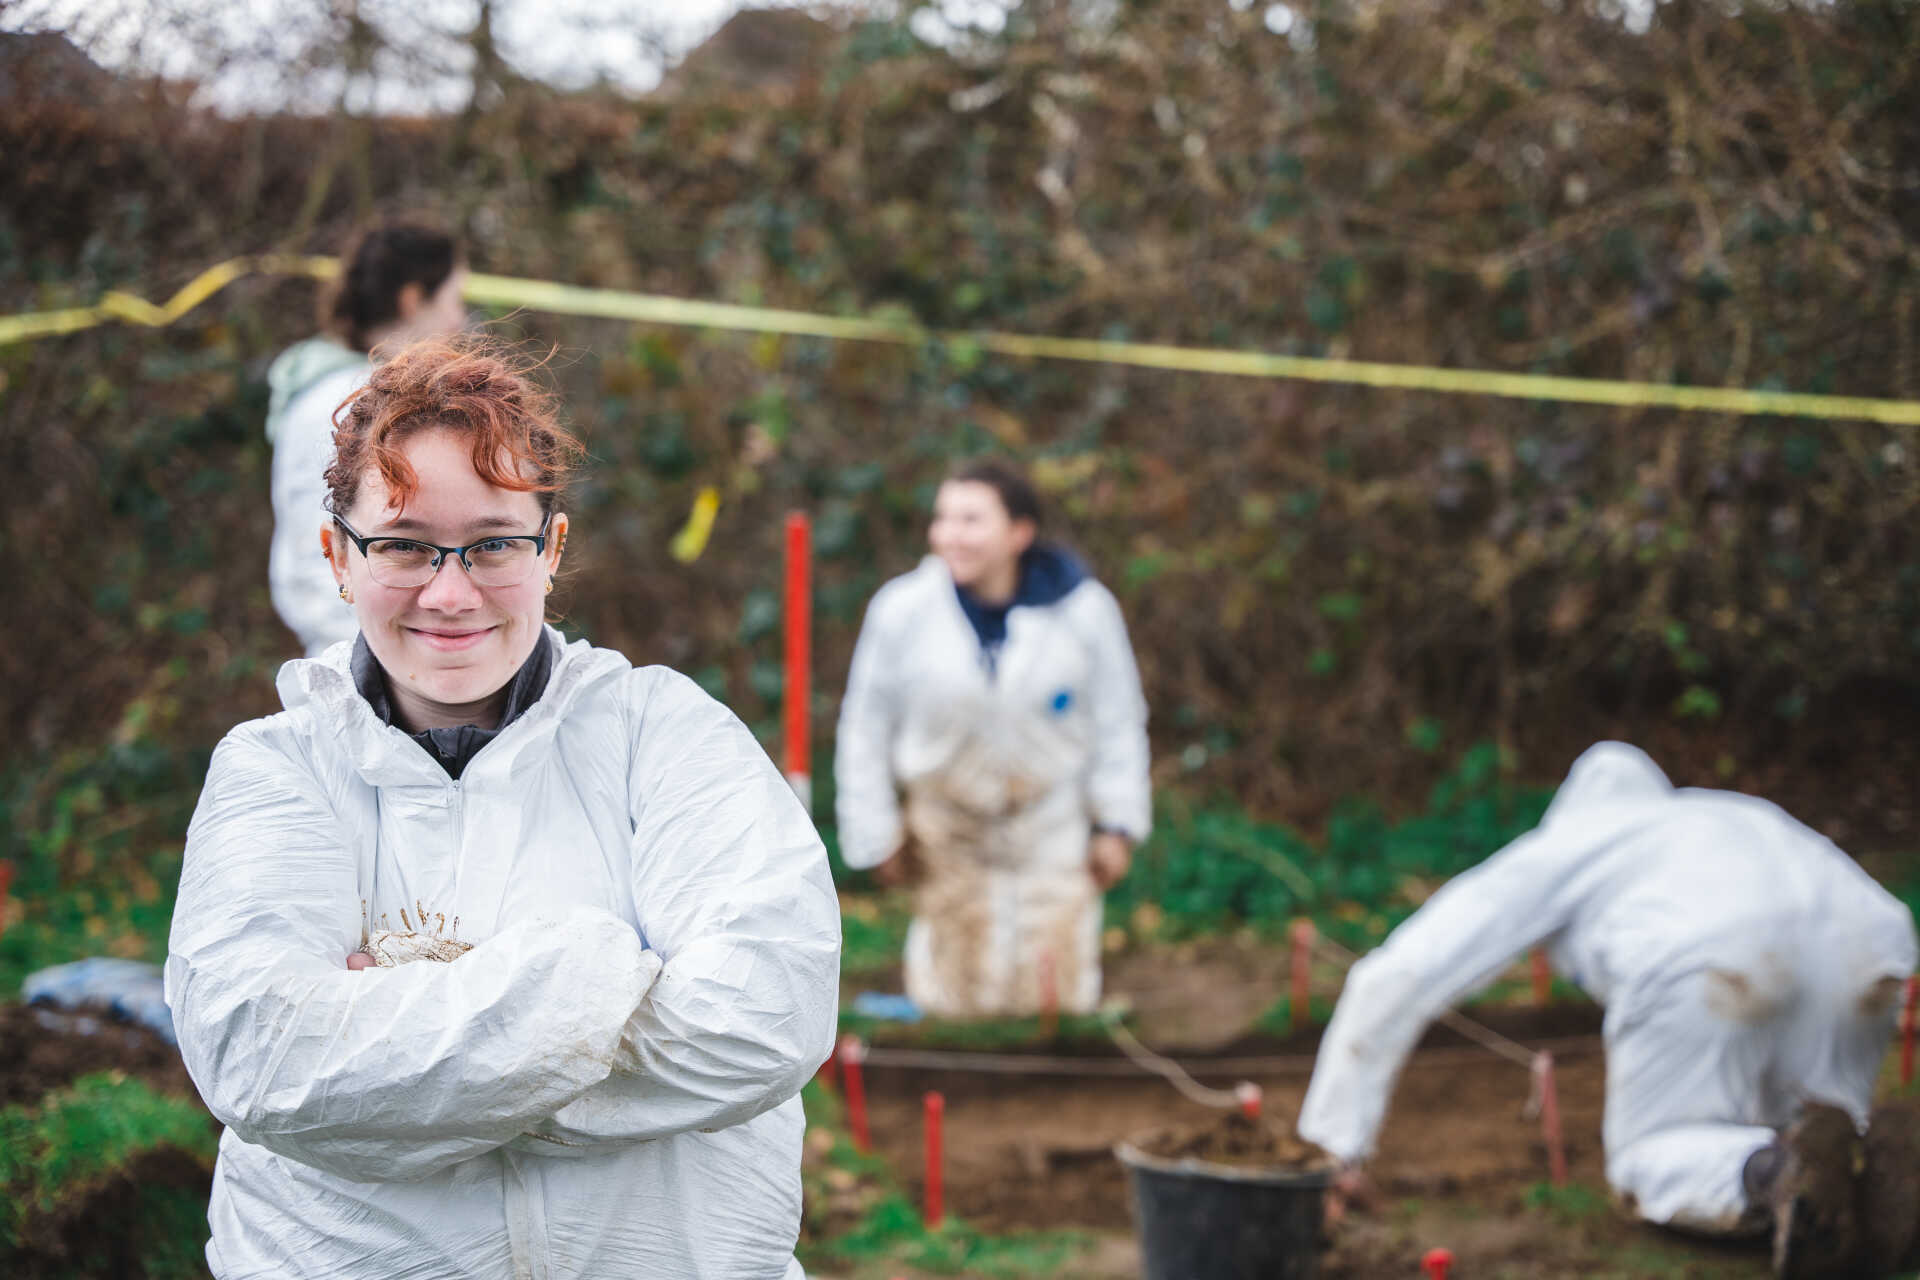 Alannah O’Shea at the Forensic Osteology excavation site